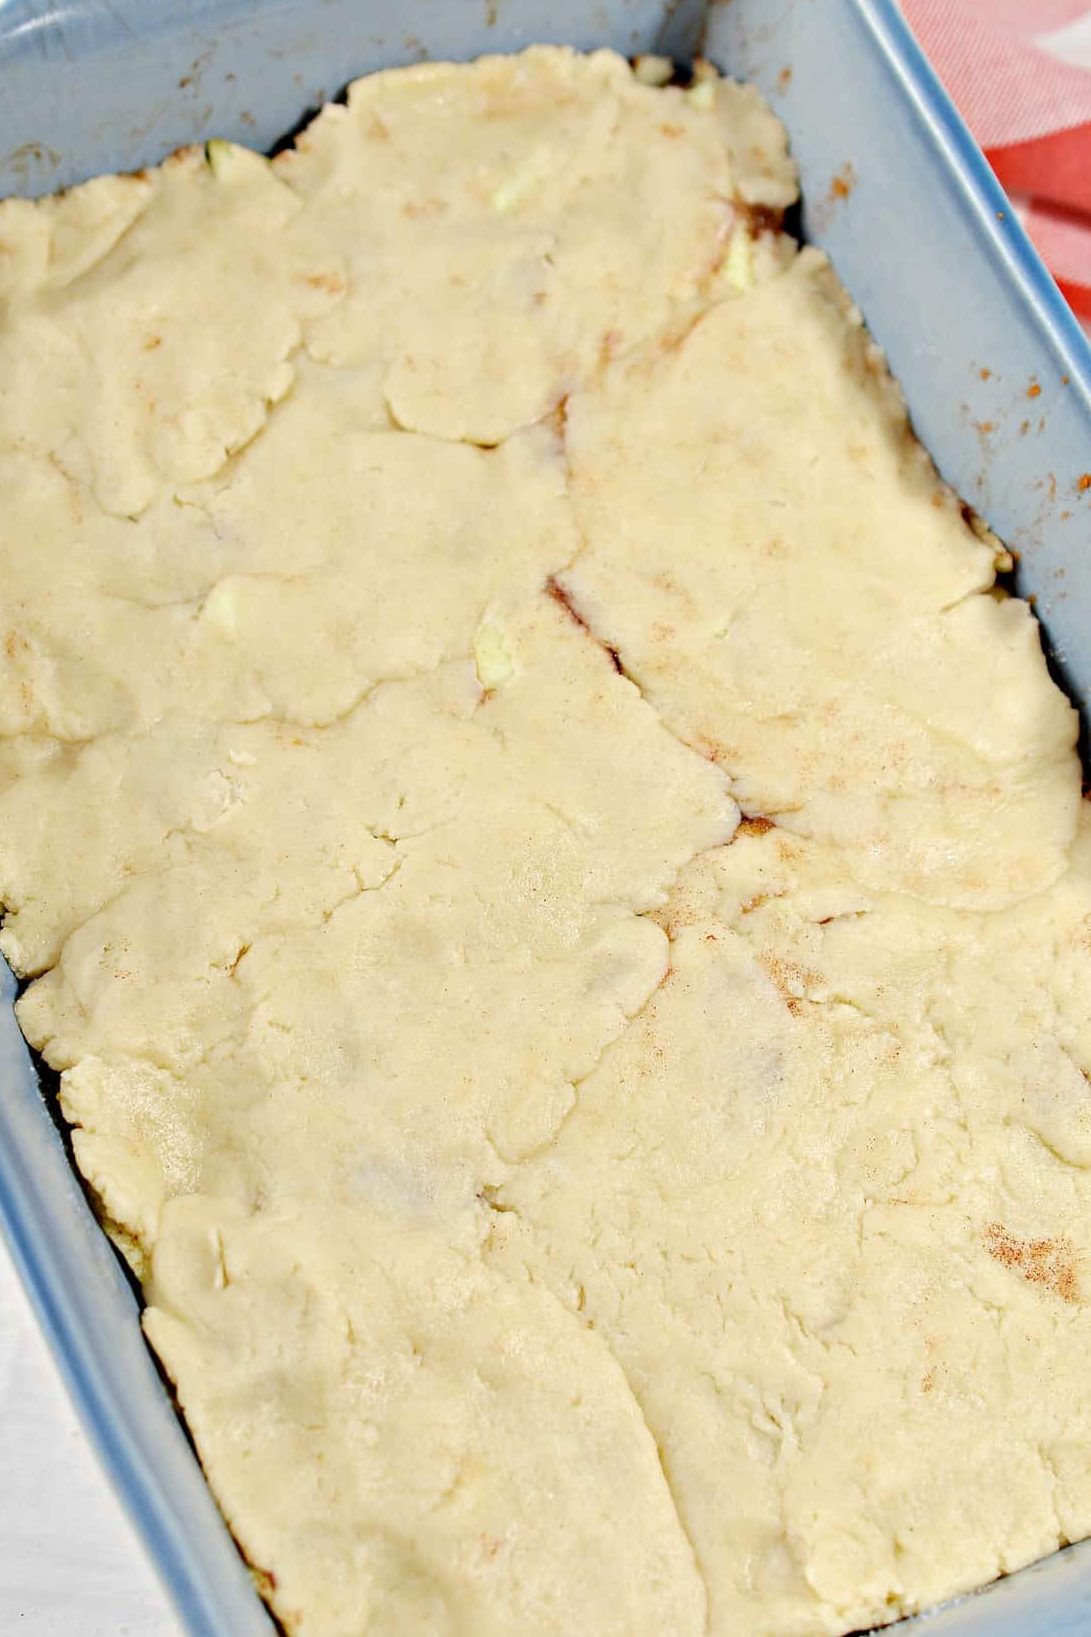 Press the second half of the dough into a flat layer over the apples in the baking dish.